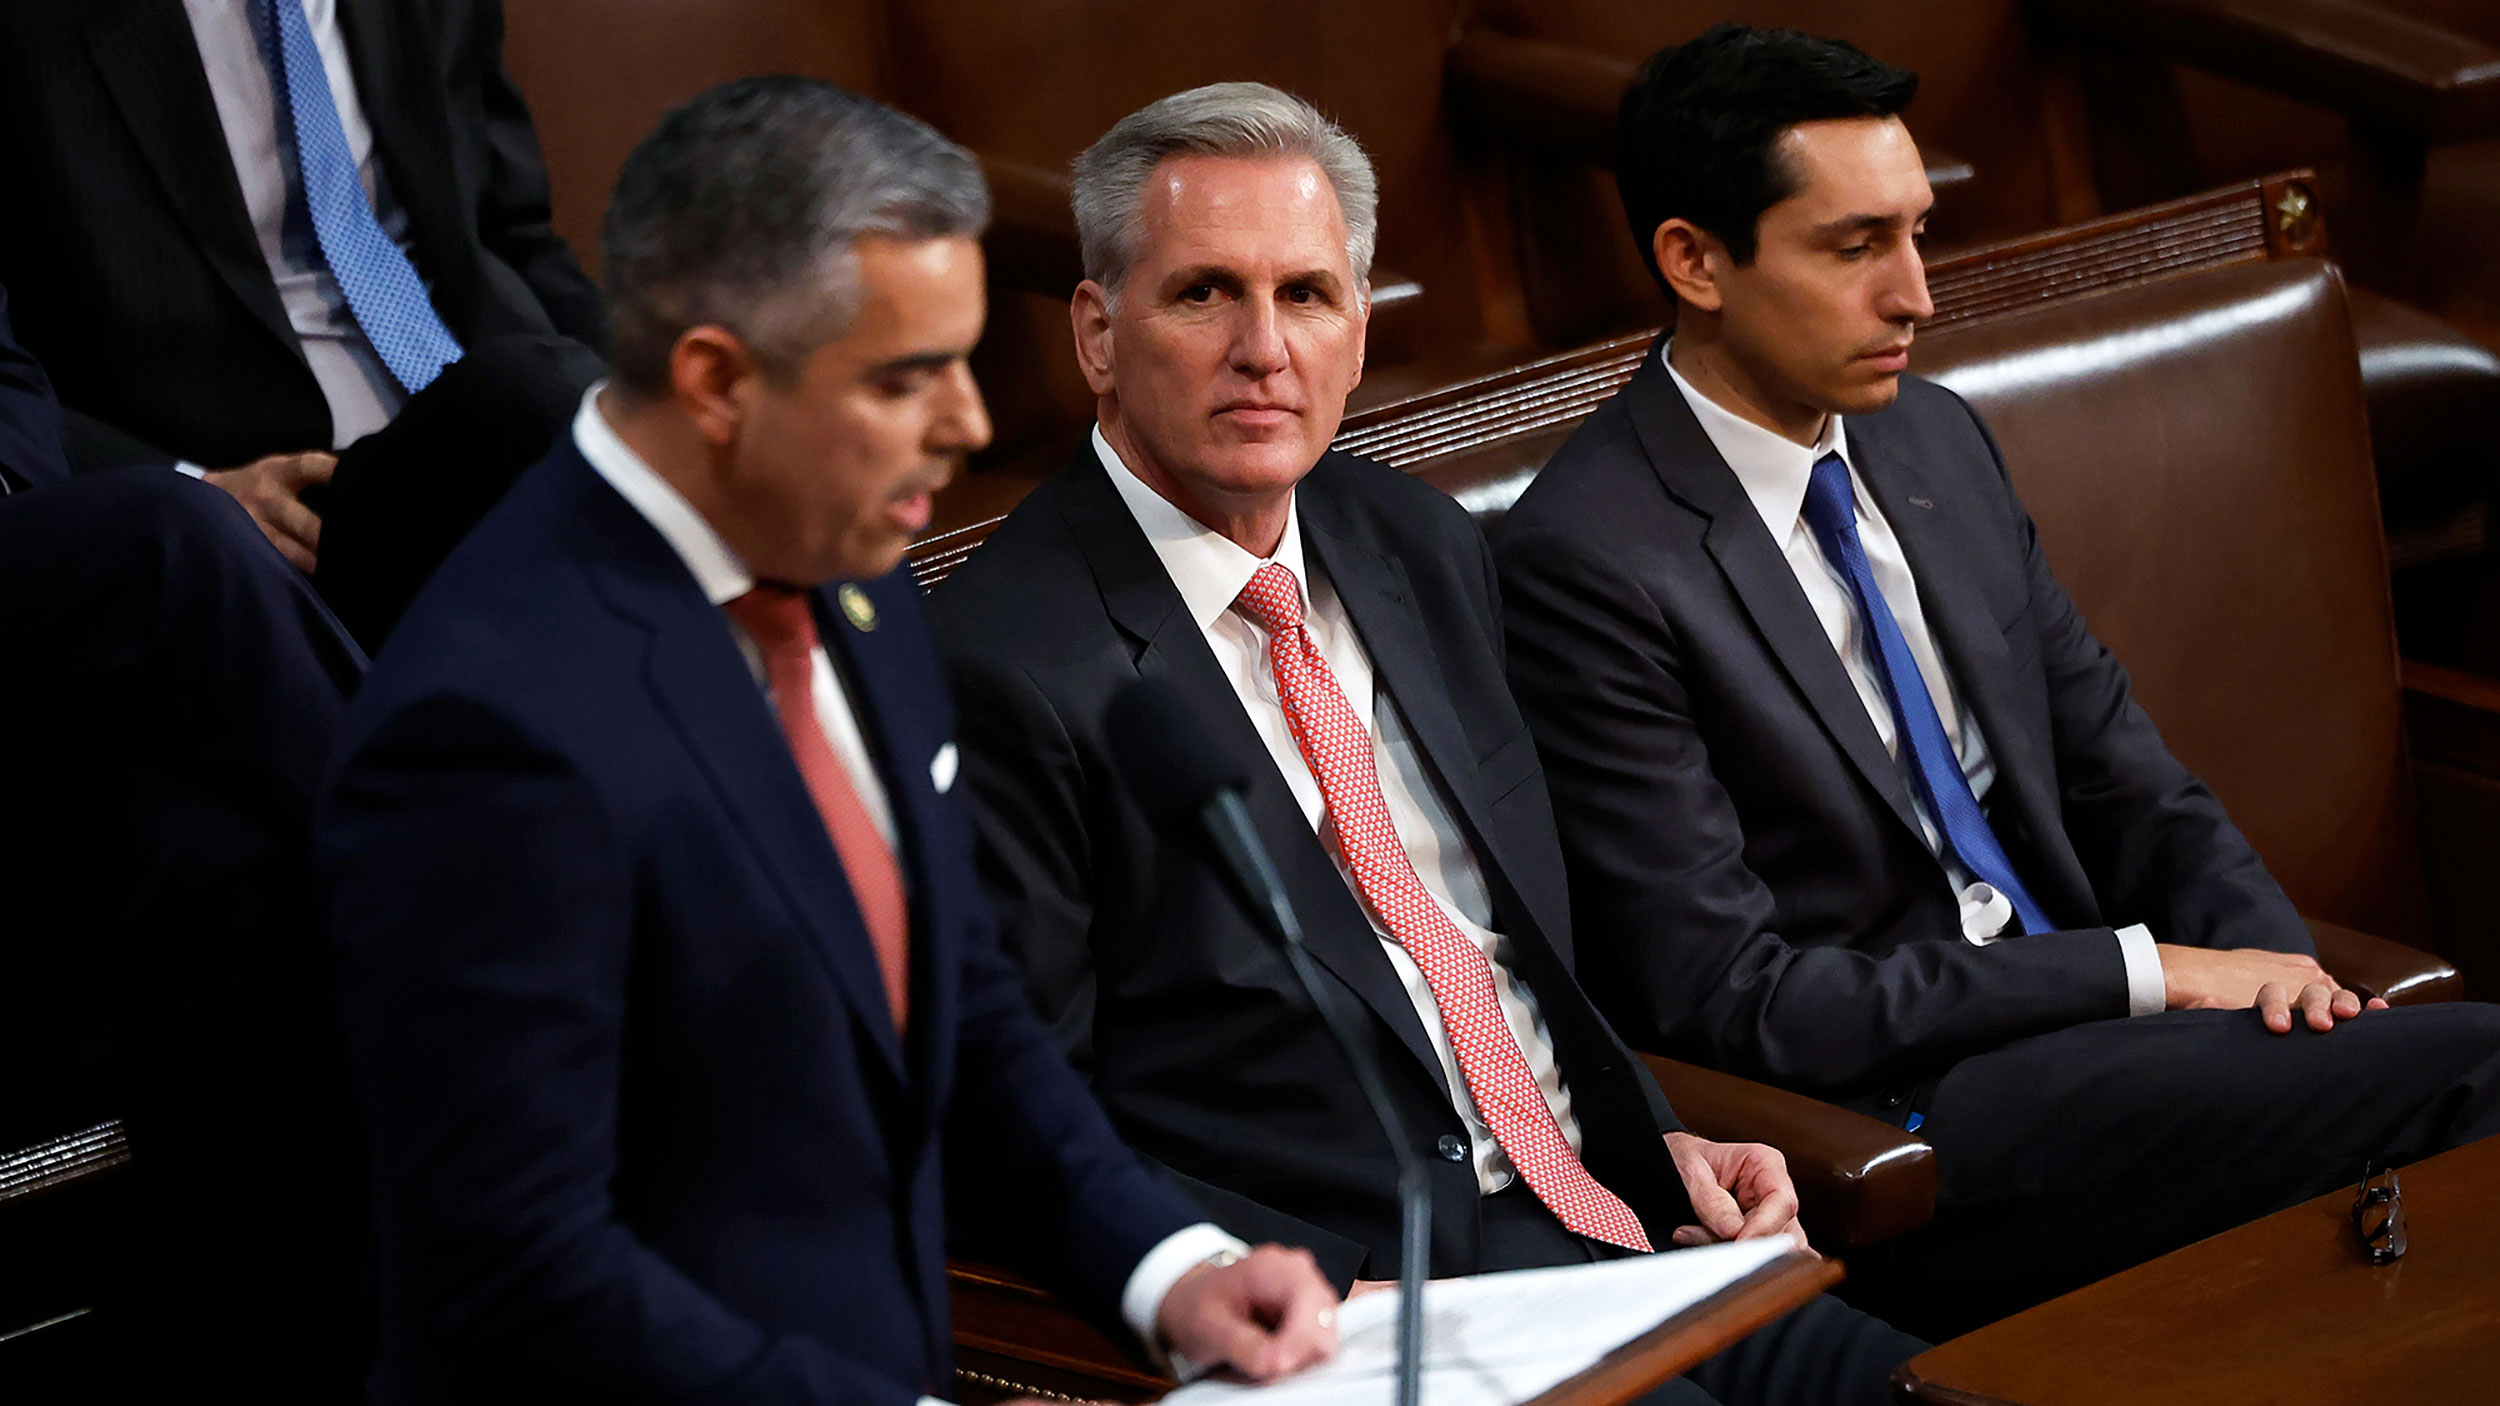 In a dramatic shift, Kevin McCarthy has so far managed to flip 15 votes on Friday in his bid to bec...